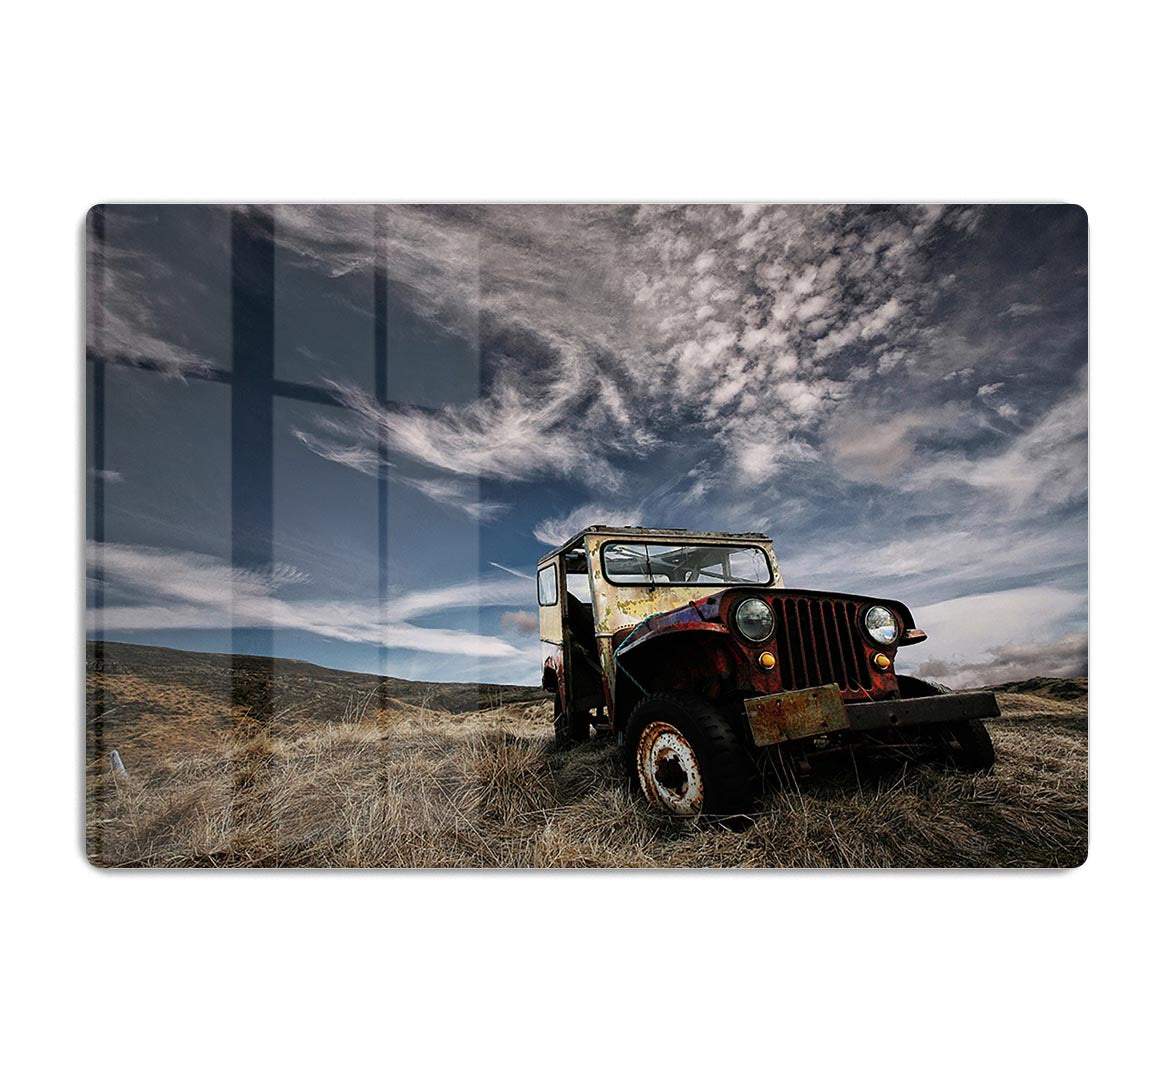 Abandoned Truck On The Countryside HD Metal Print - Canvas Art Rocks - 1